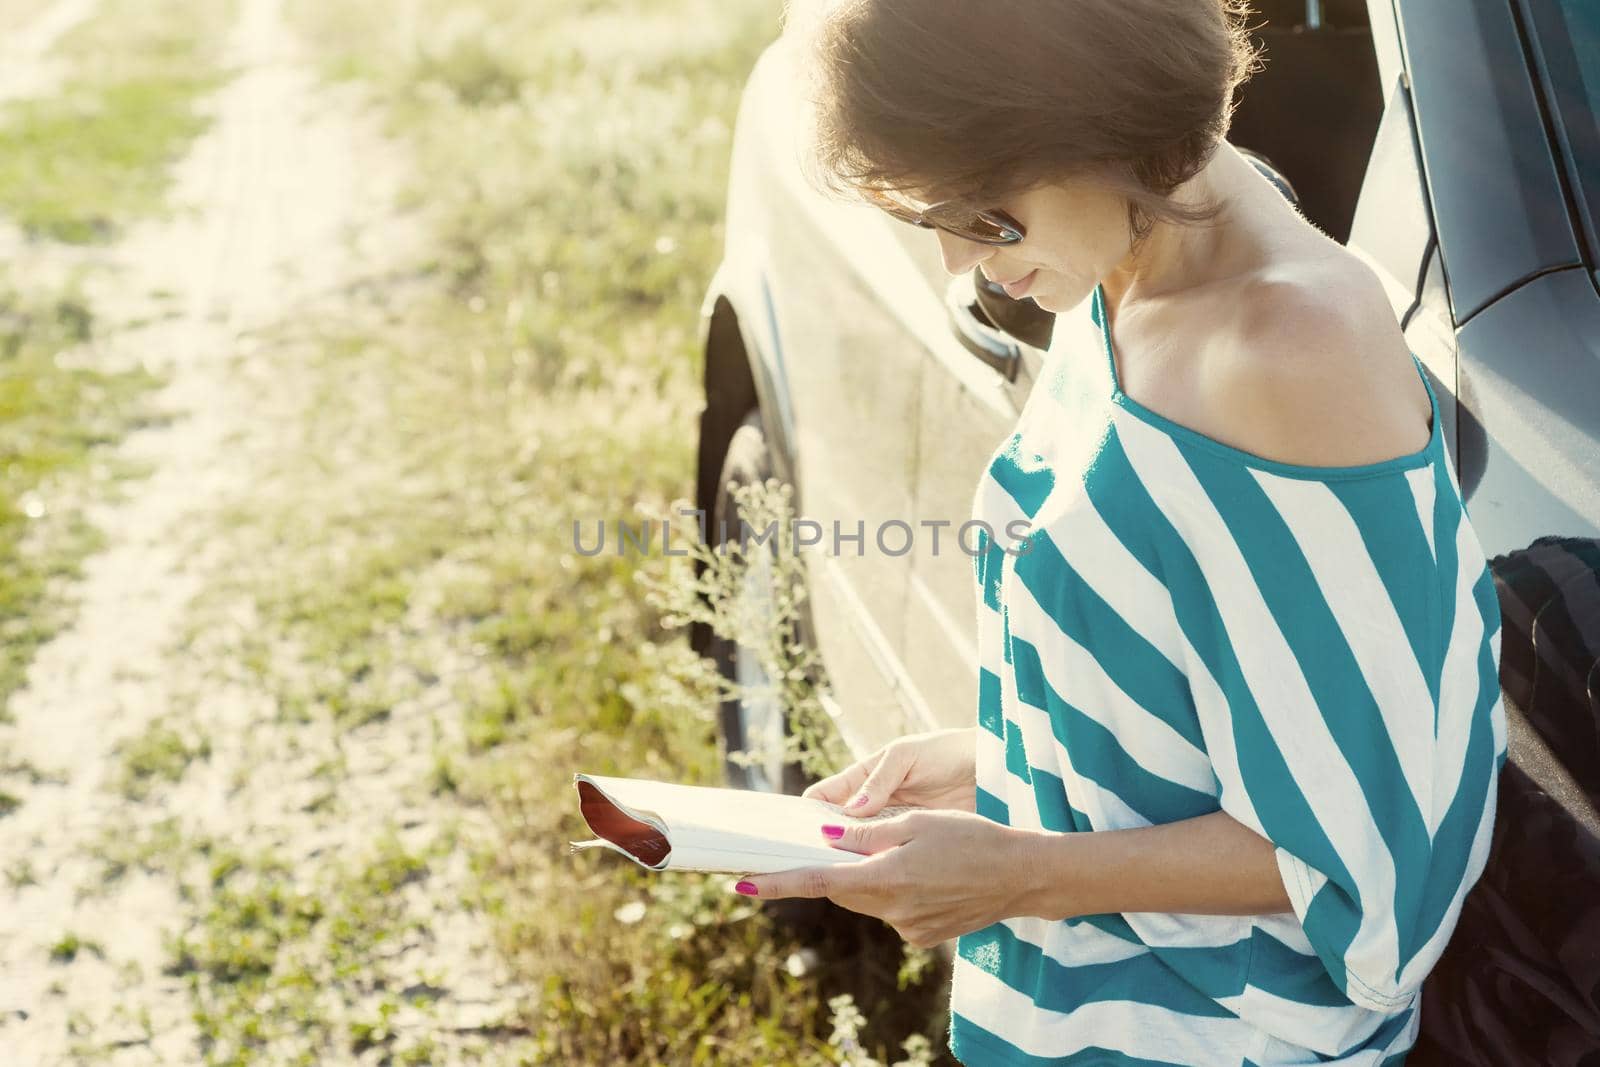 Beautiful adult woman is traveling. Stands on a country road with a road map near your car